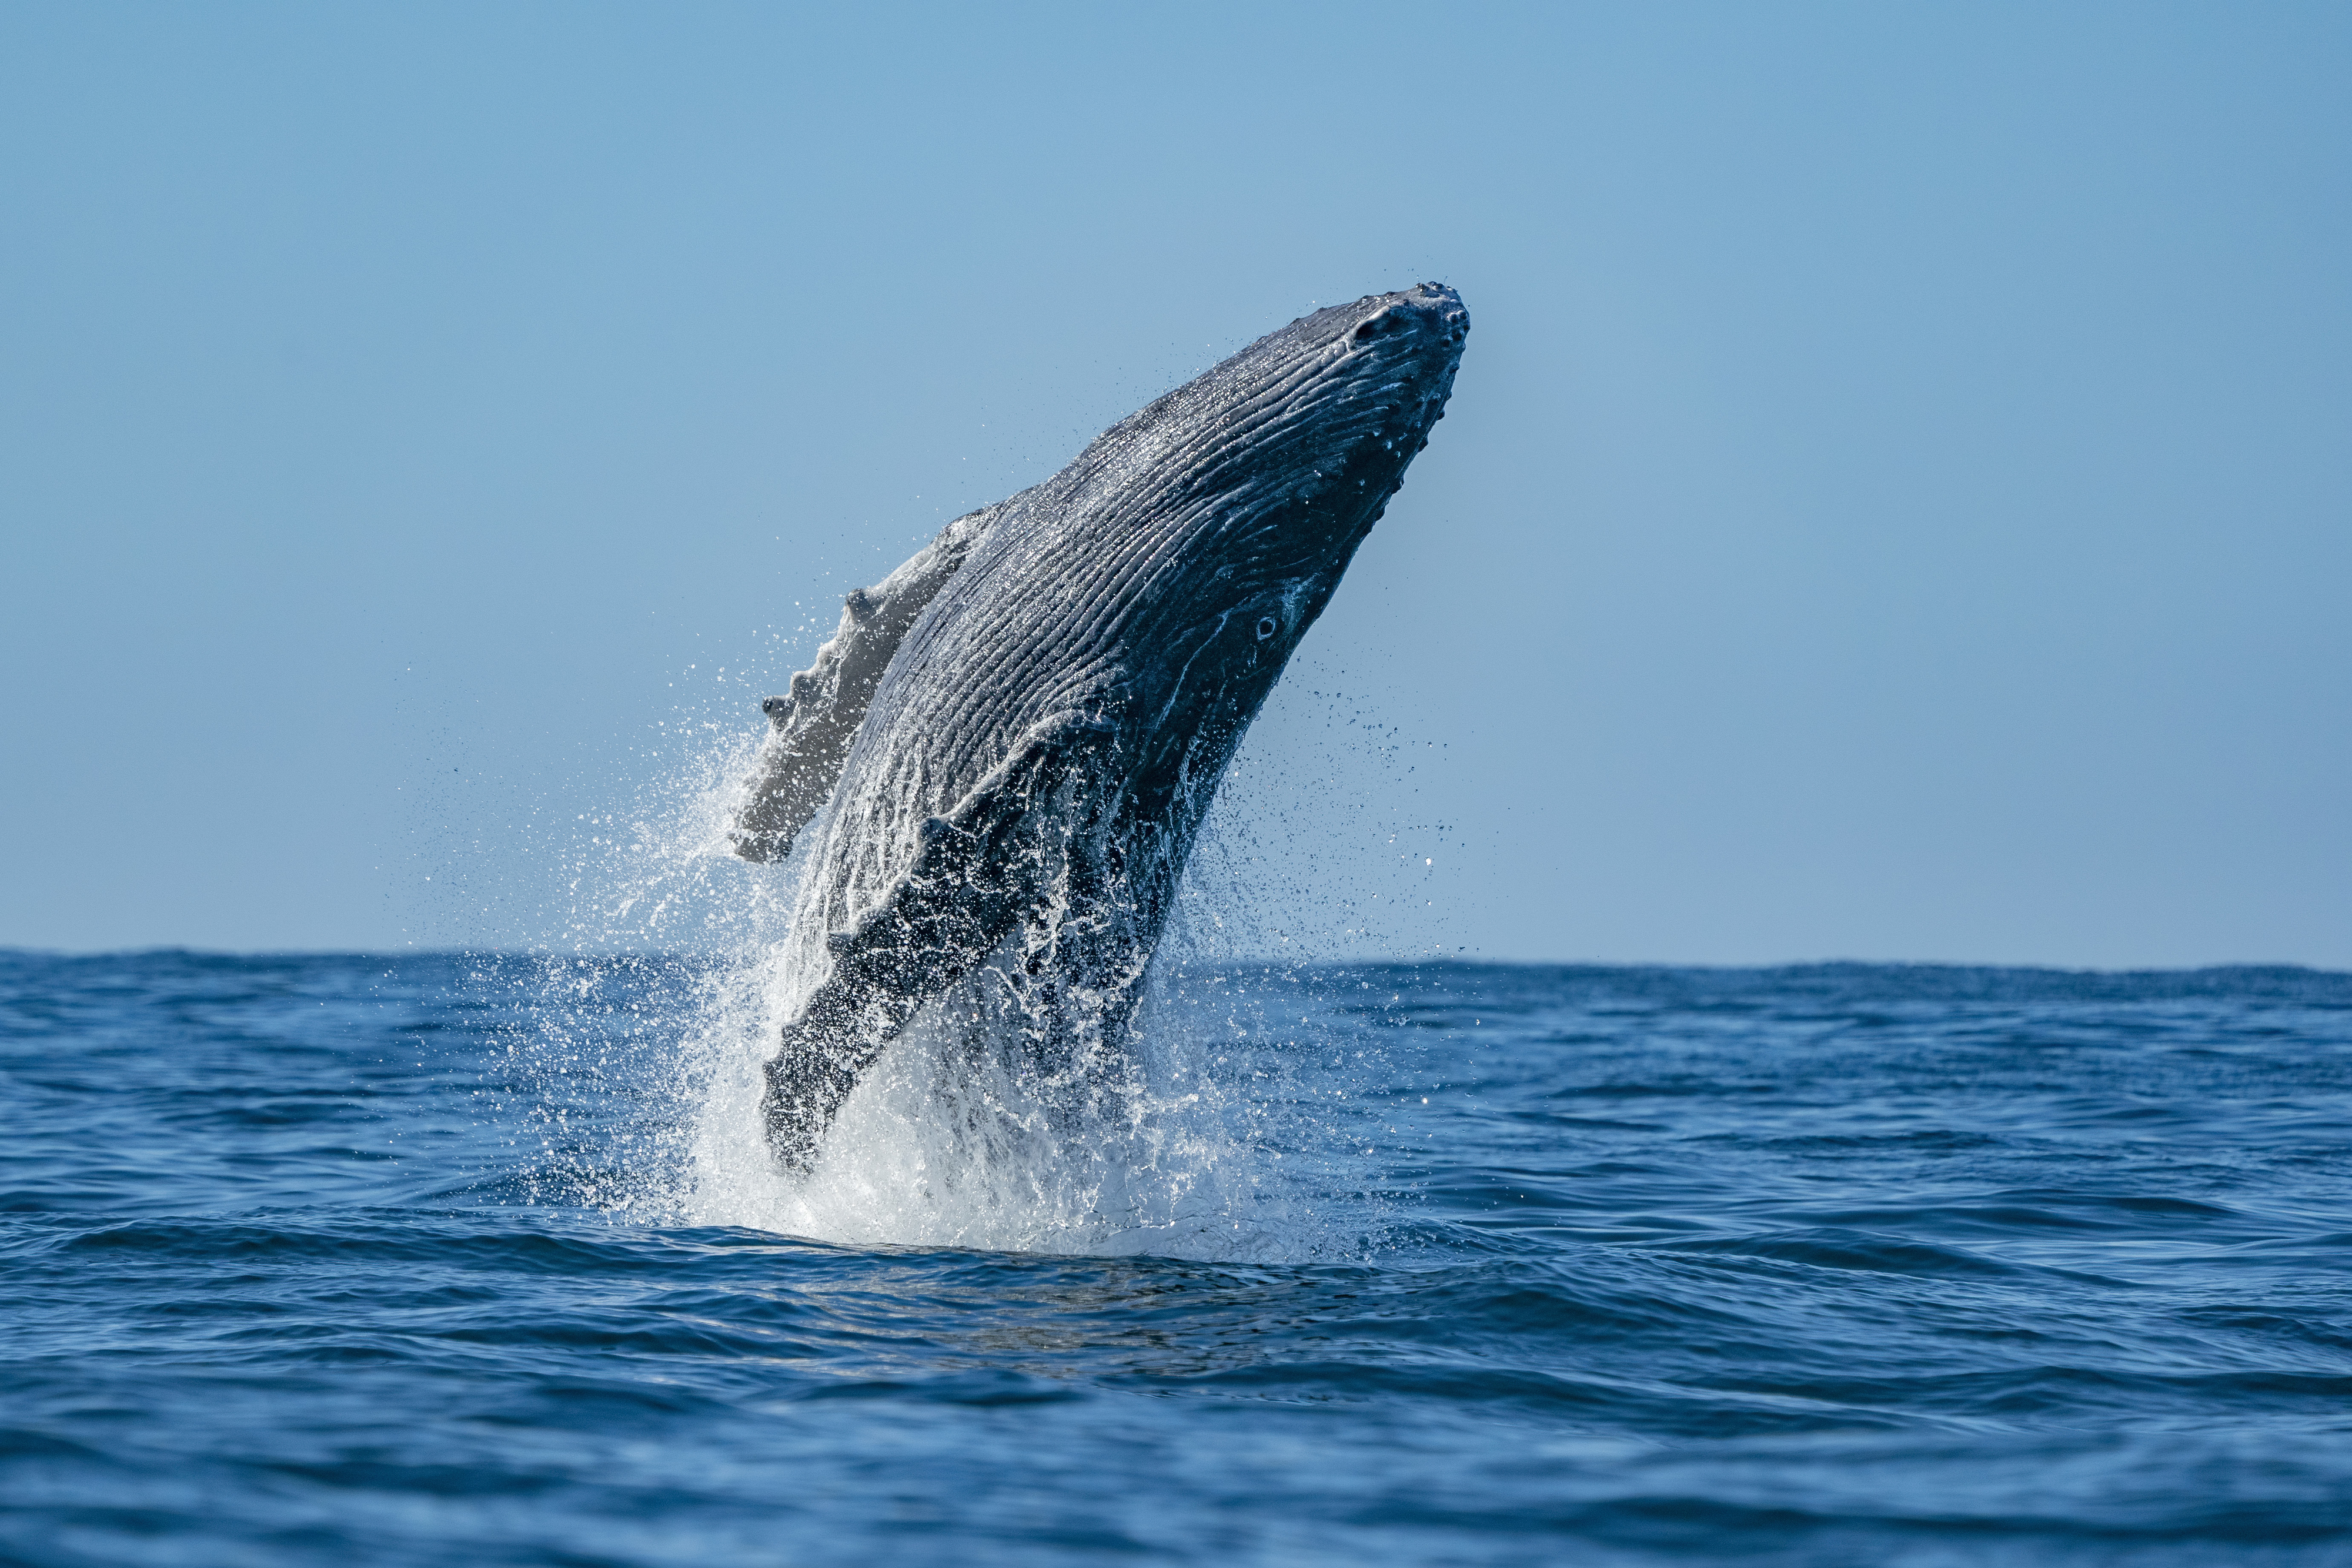 A humpback whale emerging from the ocean